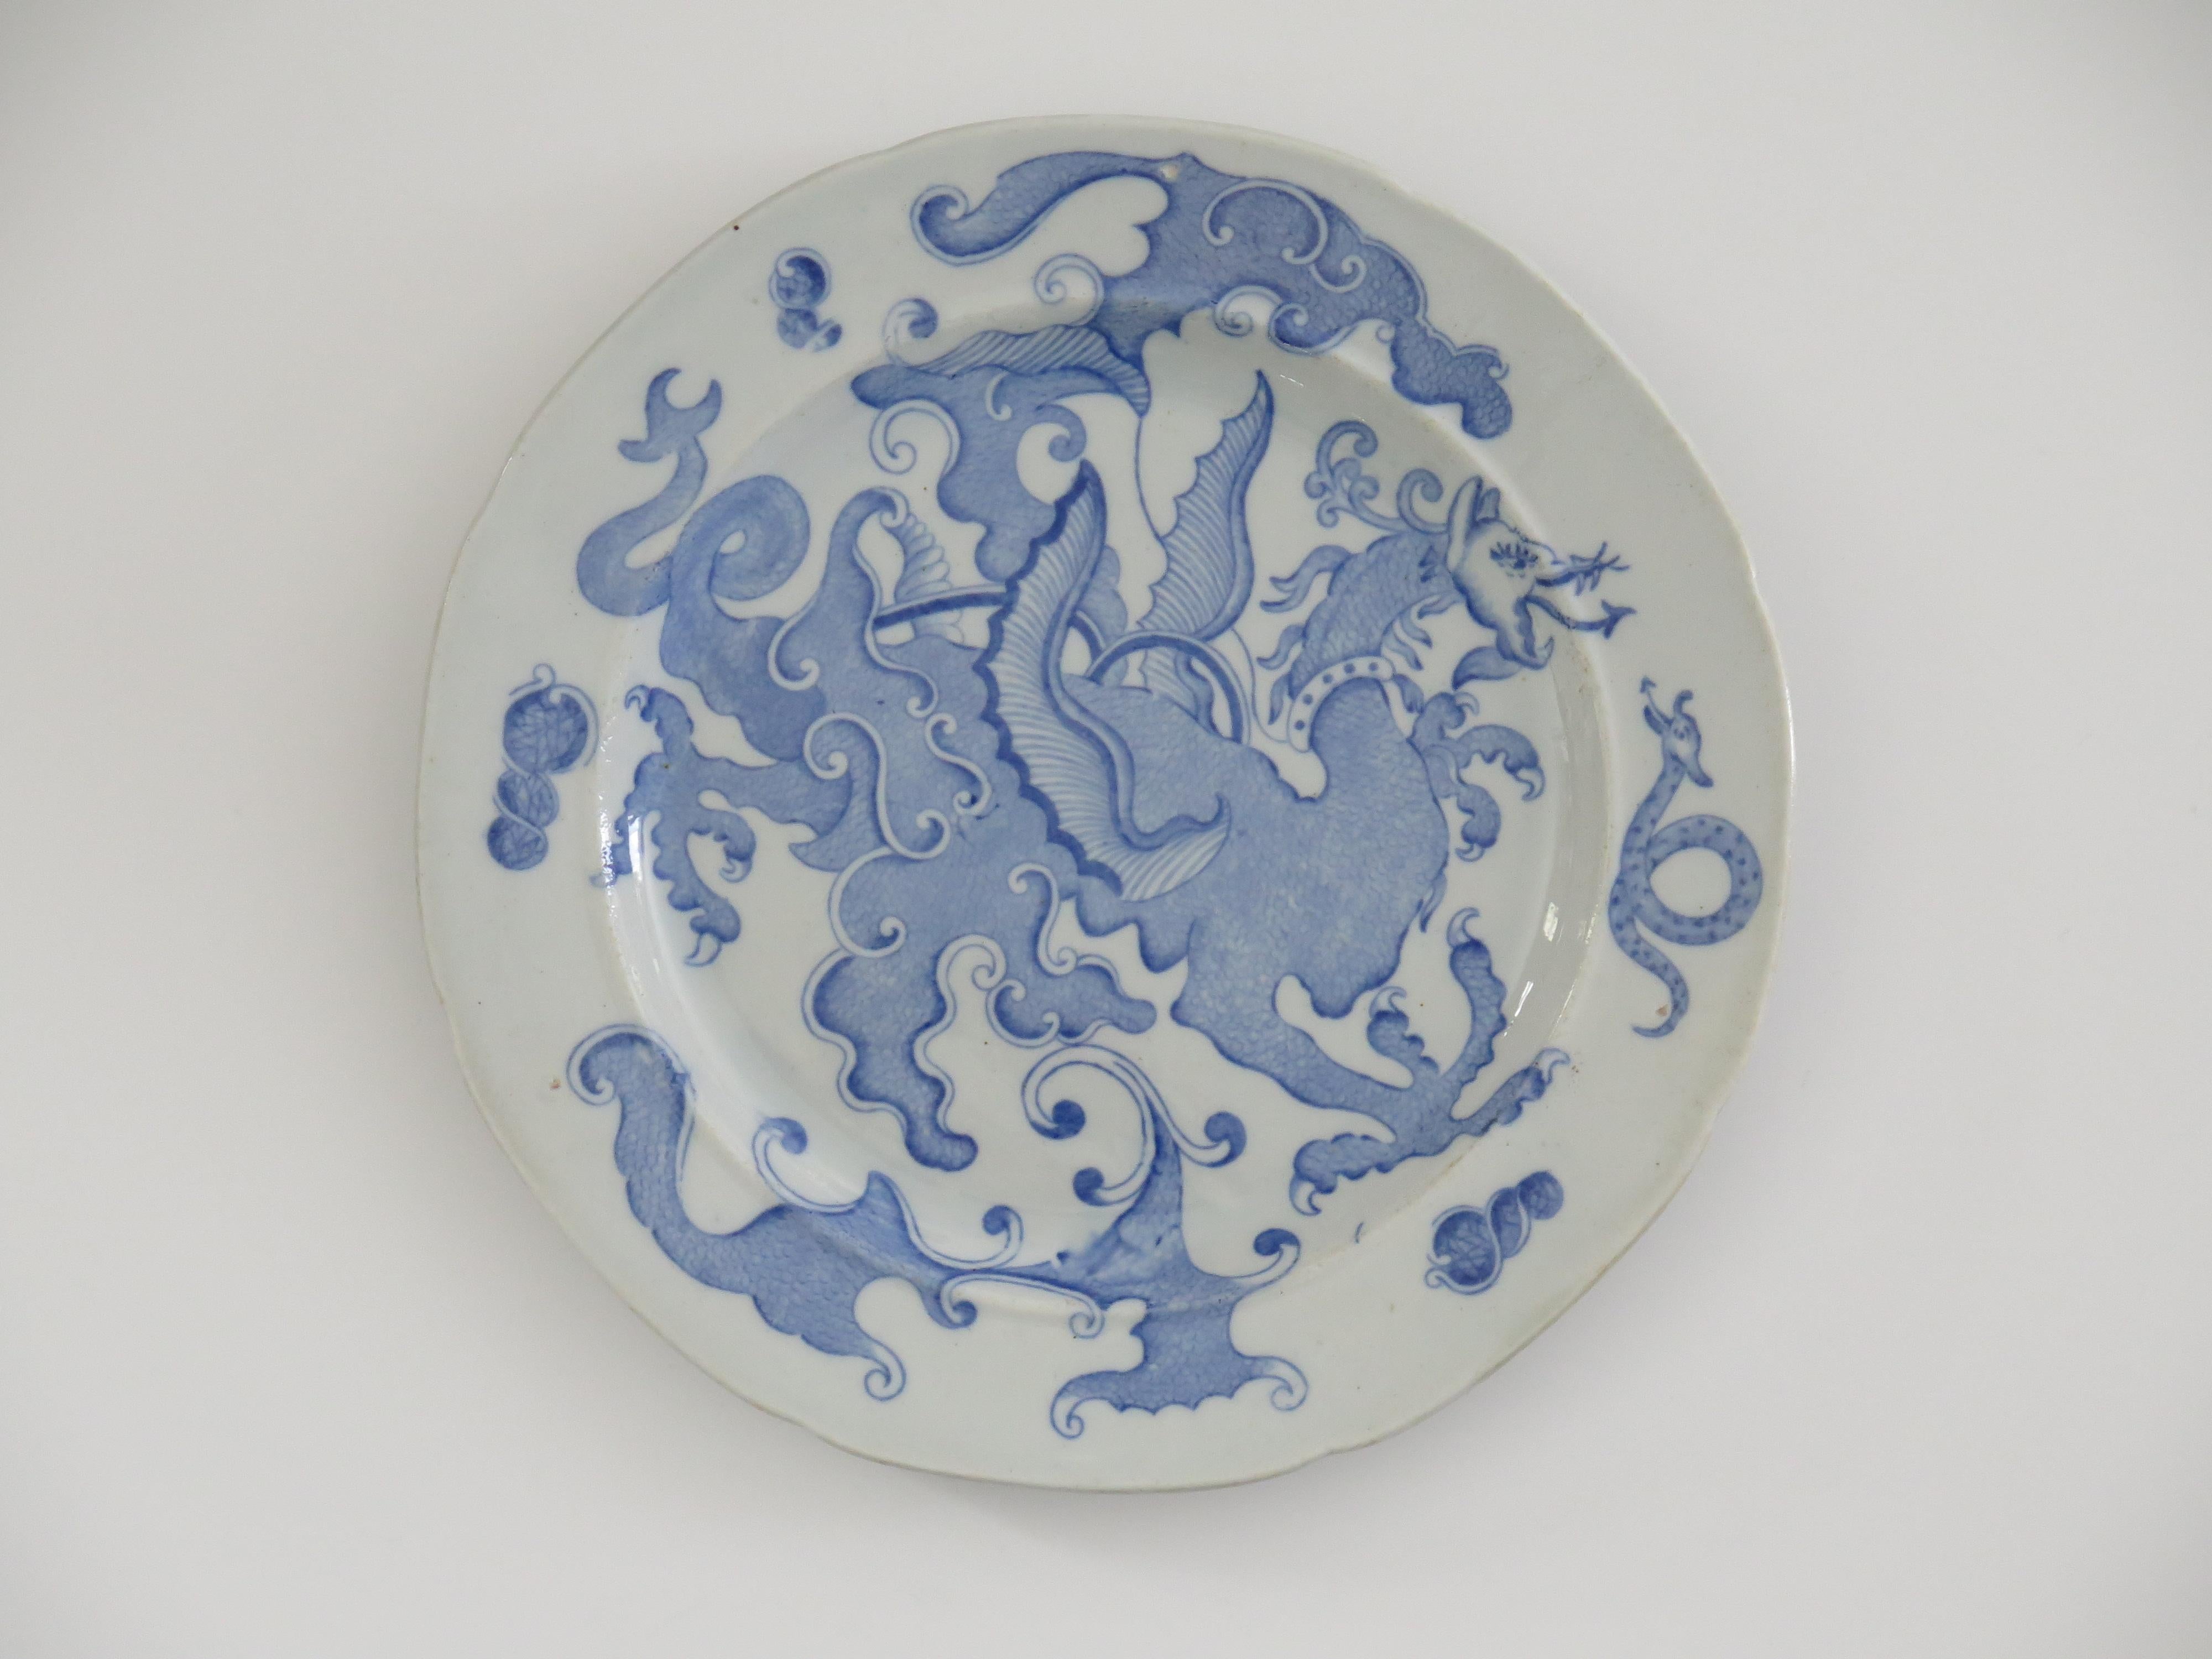 This is an early Mason's ironstone pottery Dinner Plate in the rare blue and white Chinese Dragon pattern, circa 1818.

The plate is circular with a notched indented rim.

This plate is decorated in one of the rare patterns called 